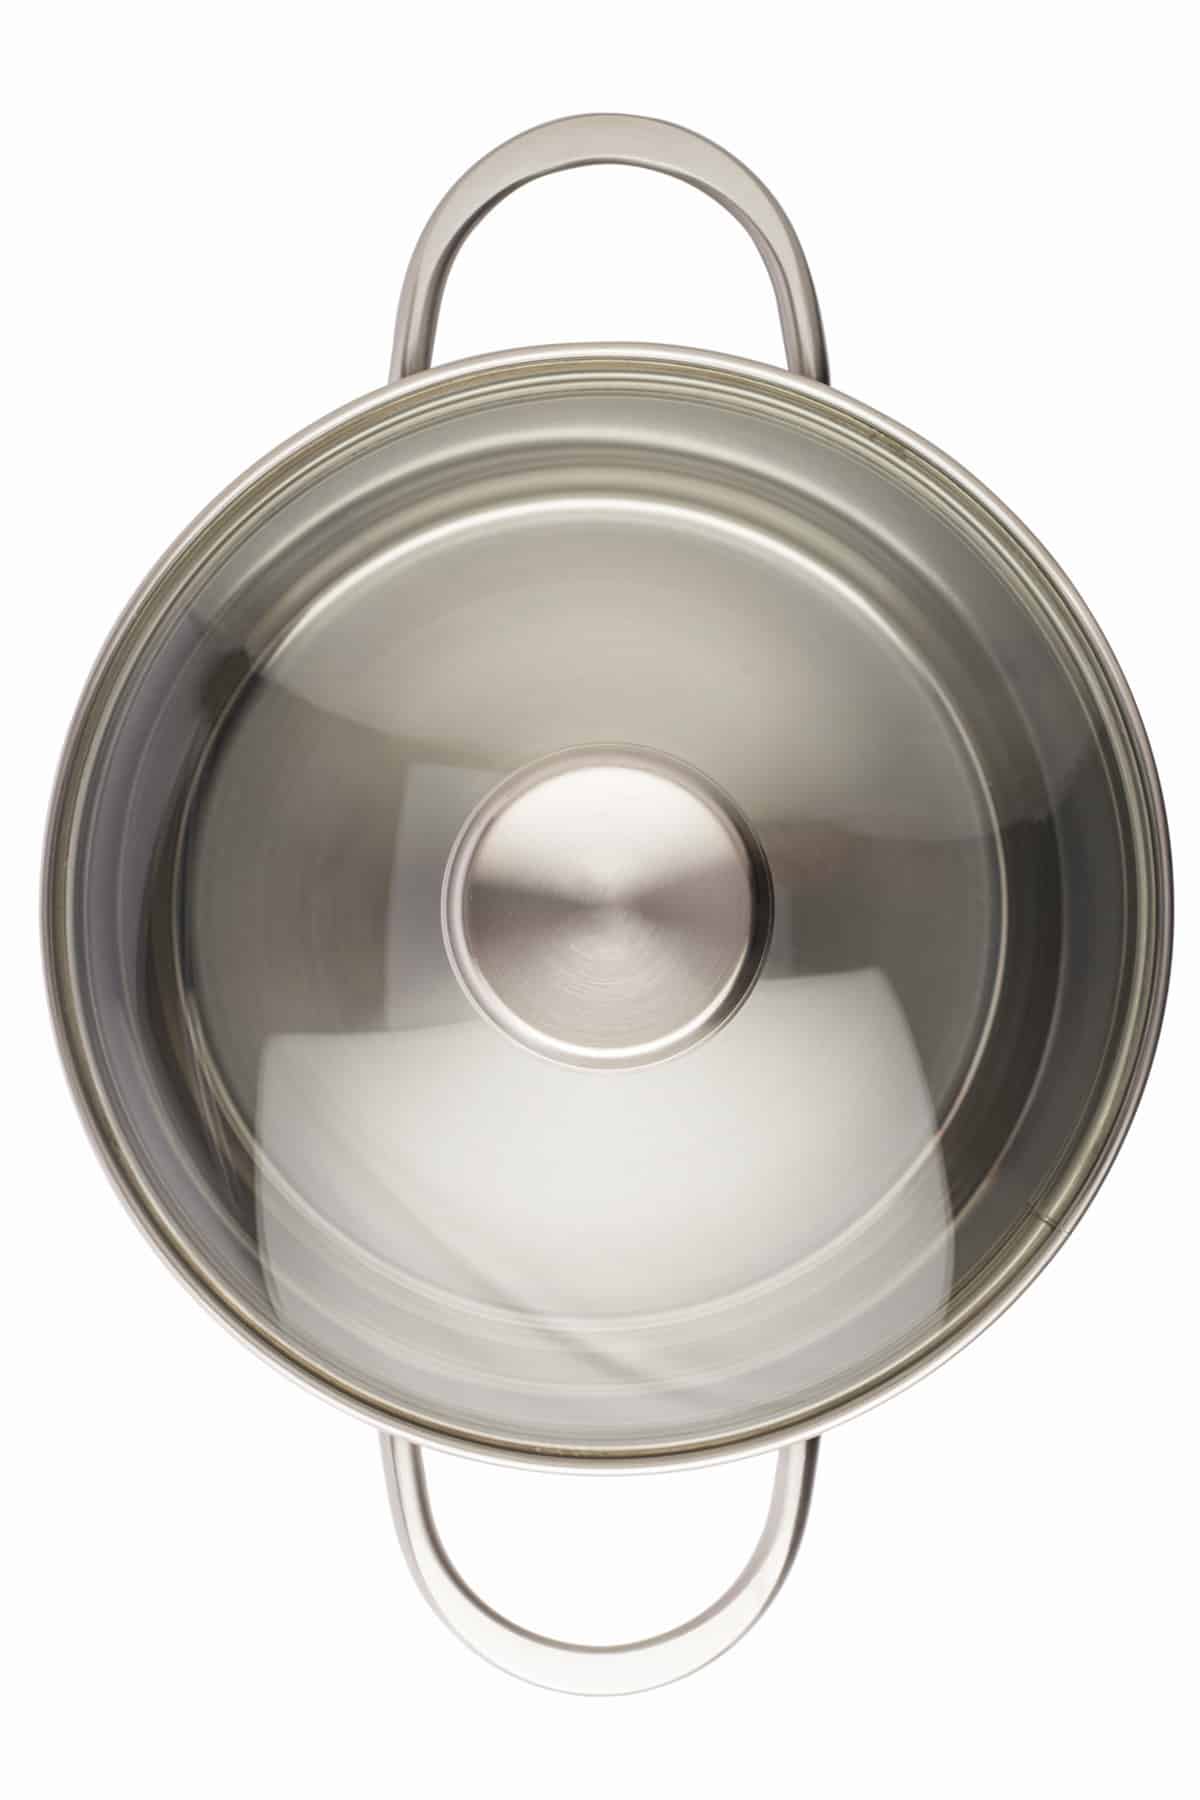 Overhead view of stainless steel pot with glass lid.